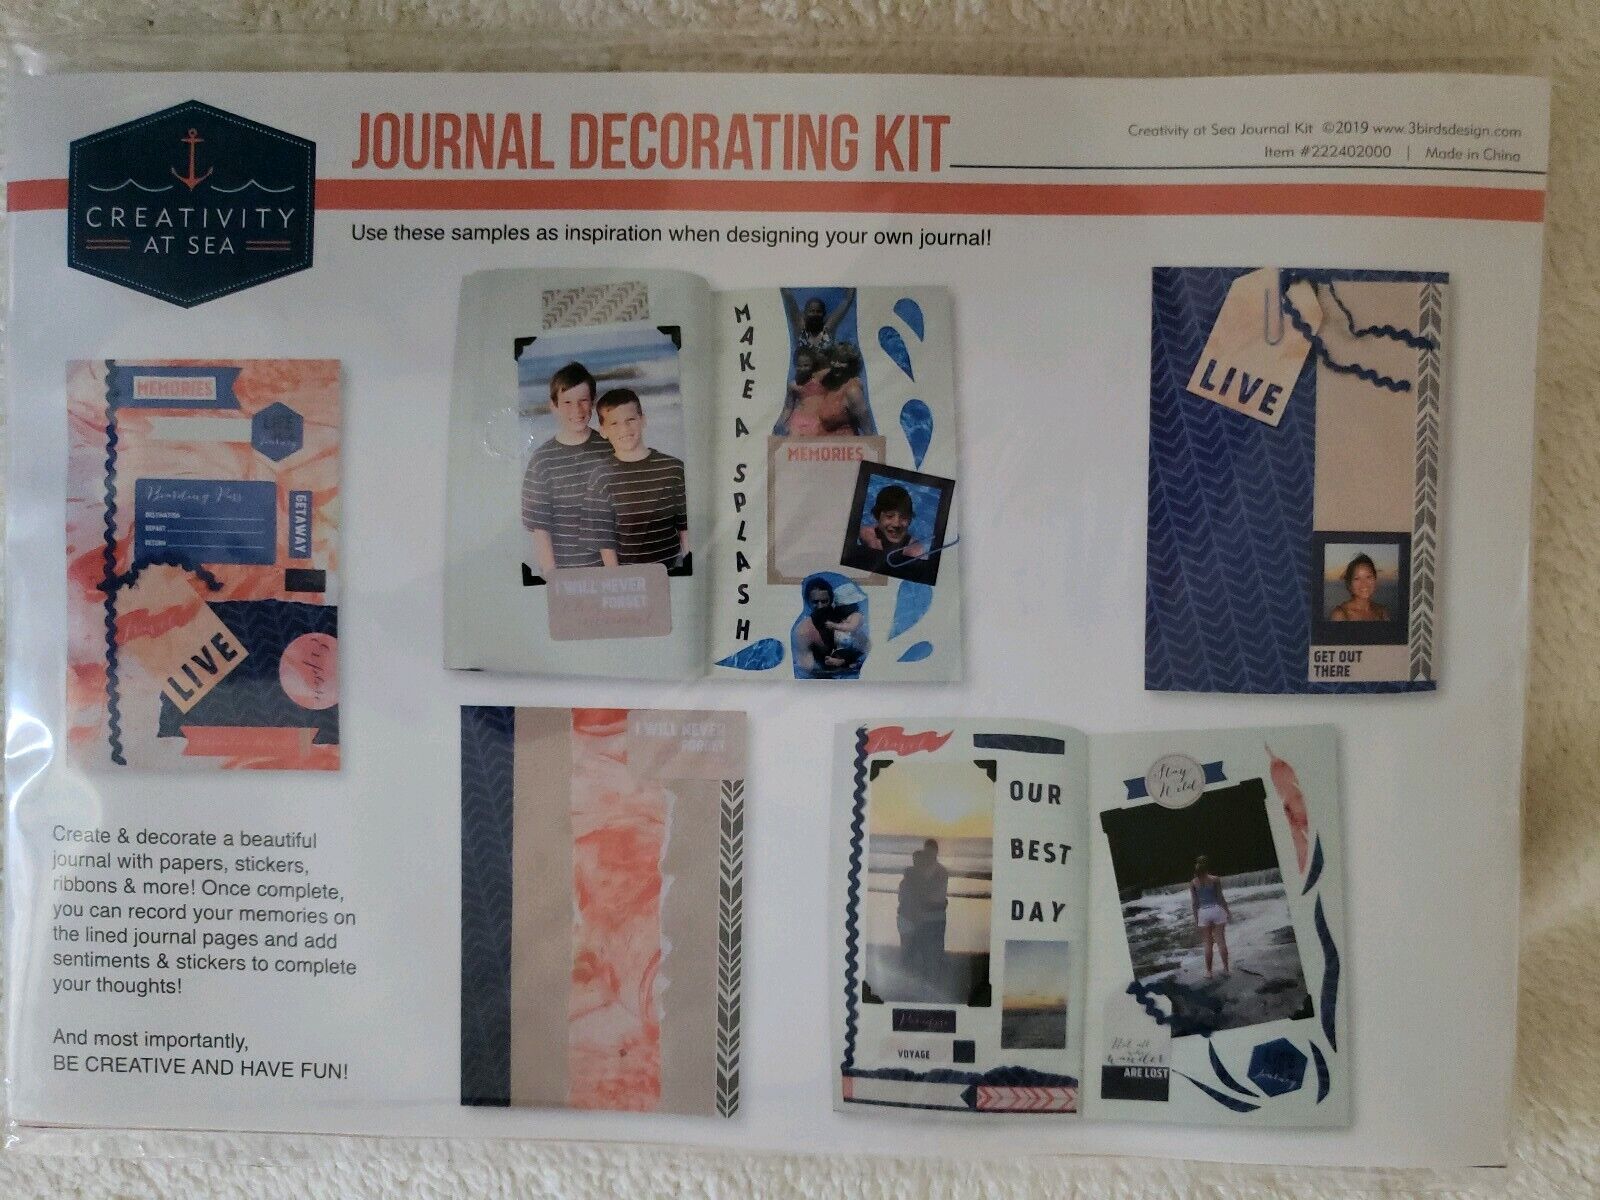 New CREATIVITY at SEA - Journal Decorating Kit Carnival Cruise Craft Project